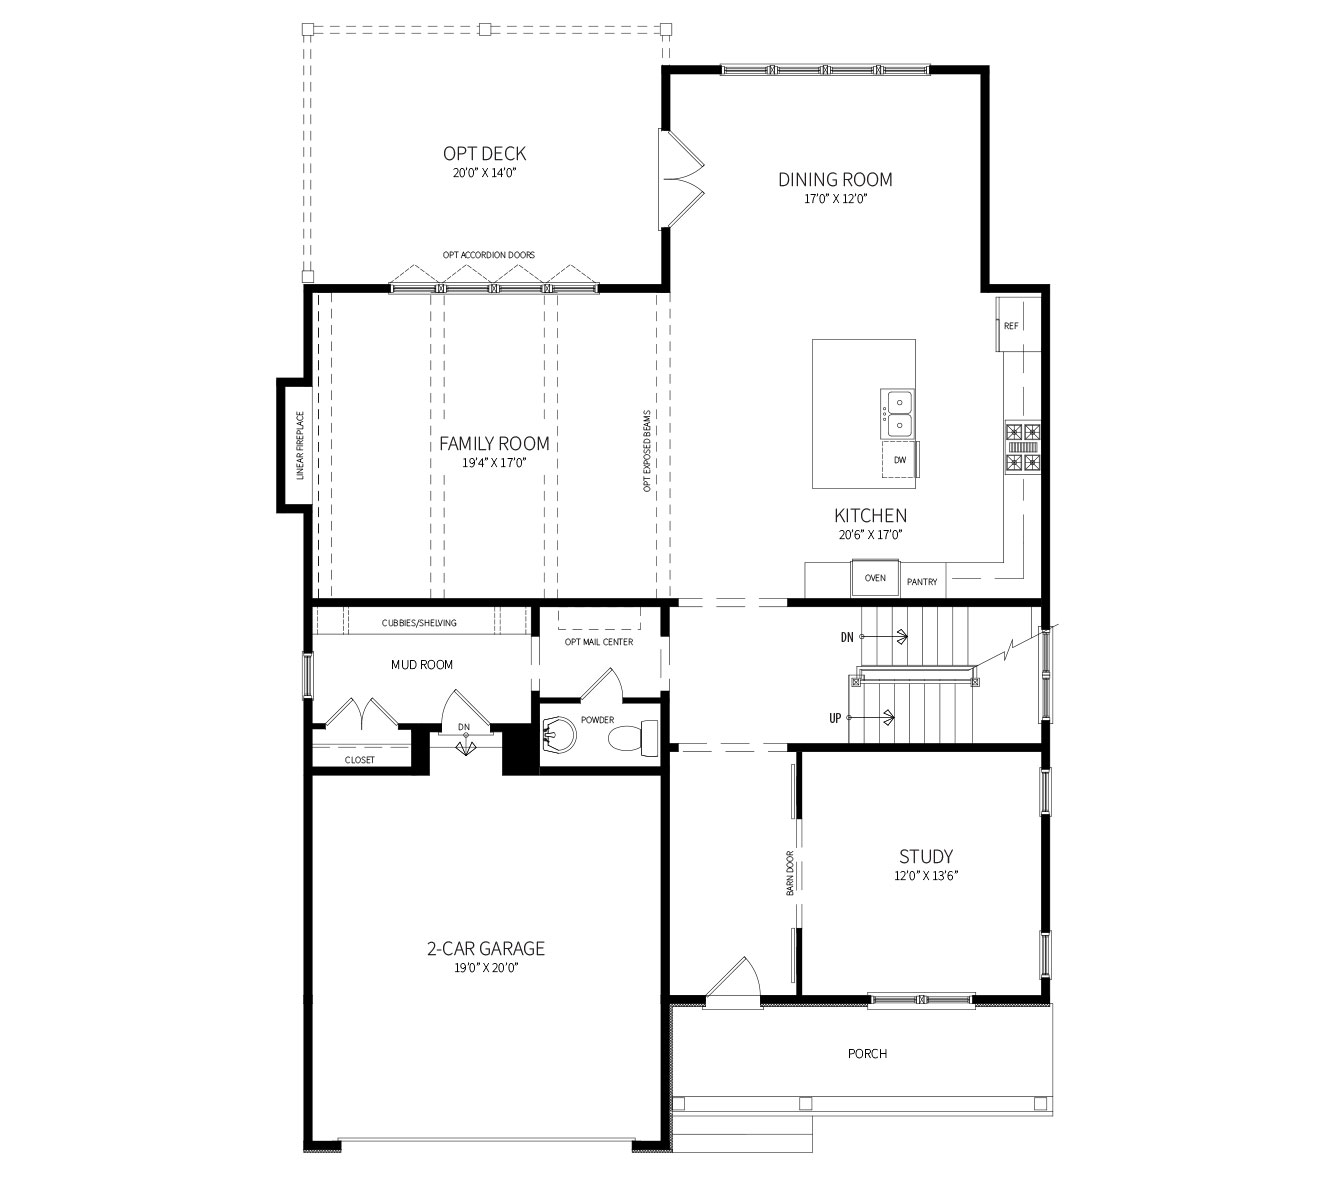 The first floor plan of the Willow model, narrow and deep, with partial front porch and expansive Family Room, Dining Room, Kitchen area.